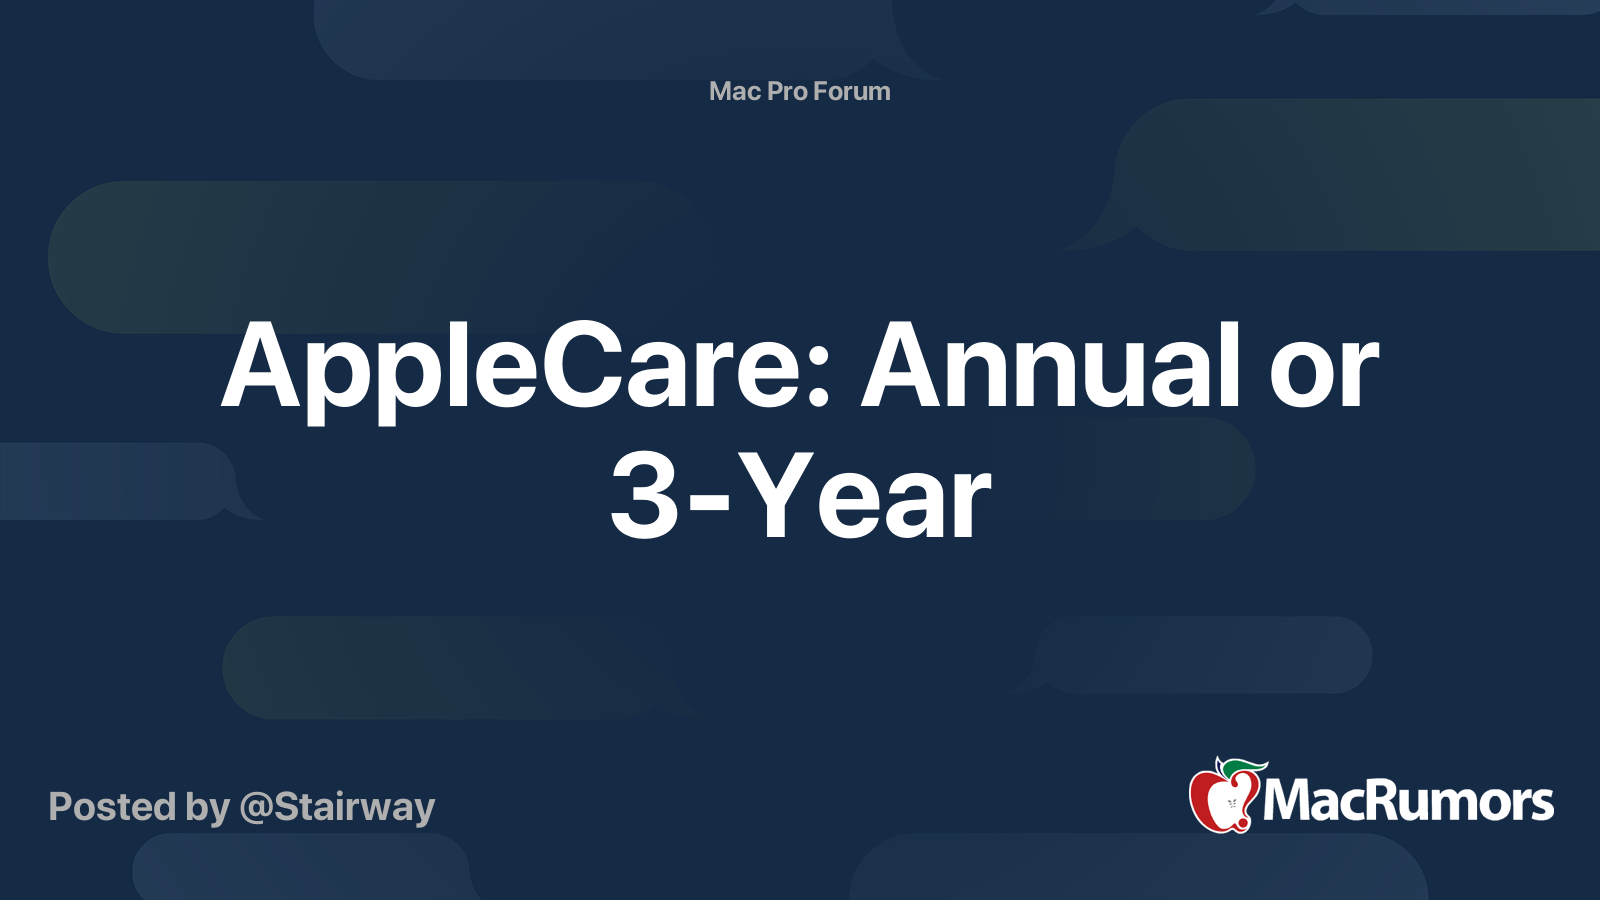 AppleCare: Annual or 3-Year